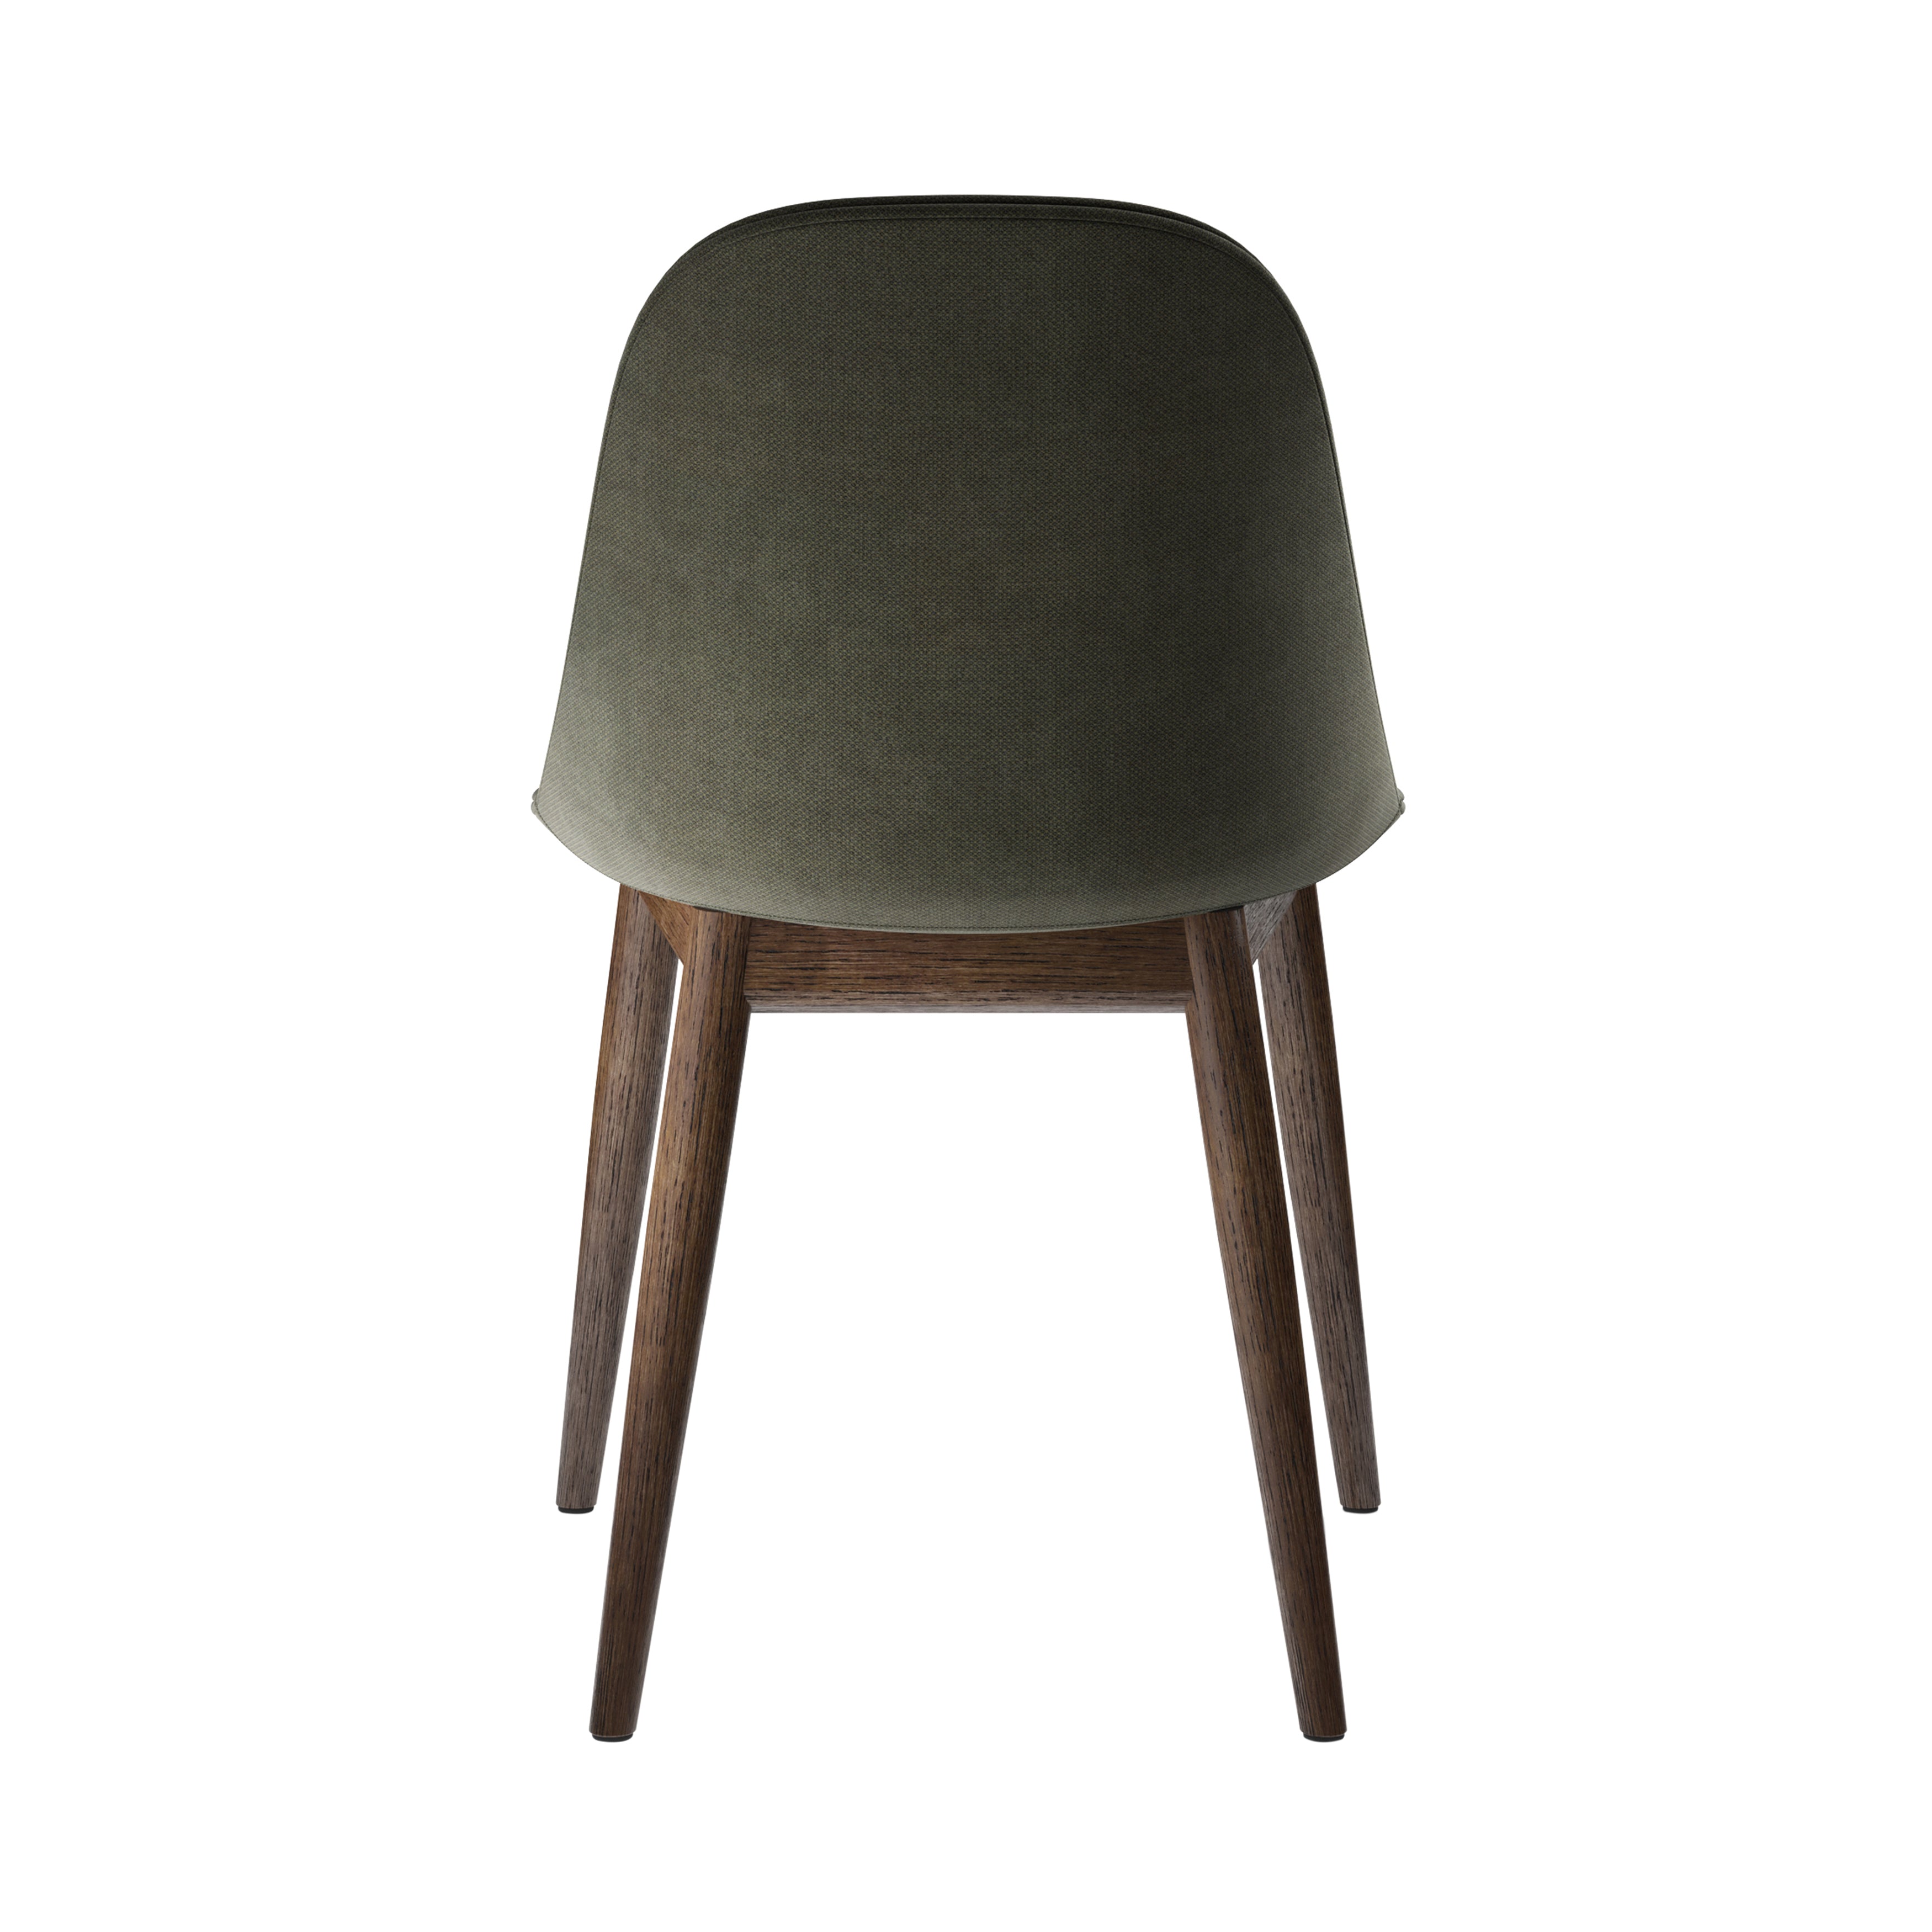 Harbour Side Chair: Wood Base Upholstered + Dark Stained Oak + Fiord2 961